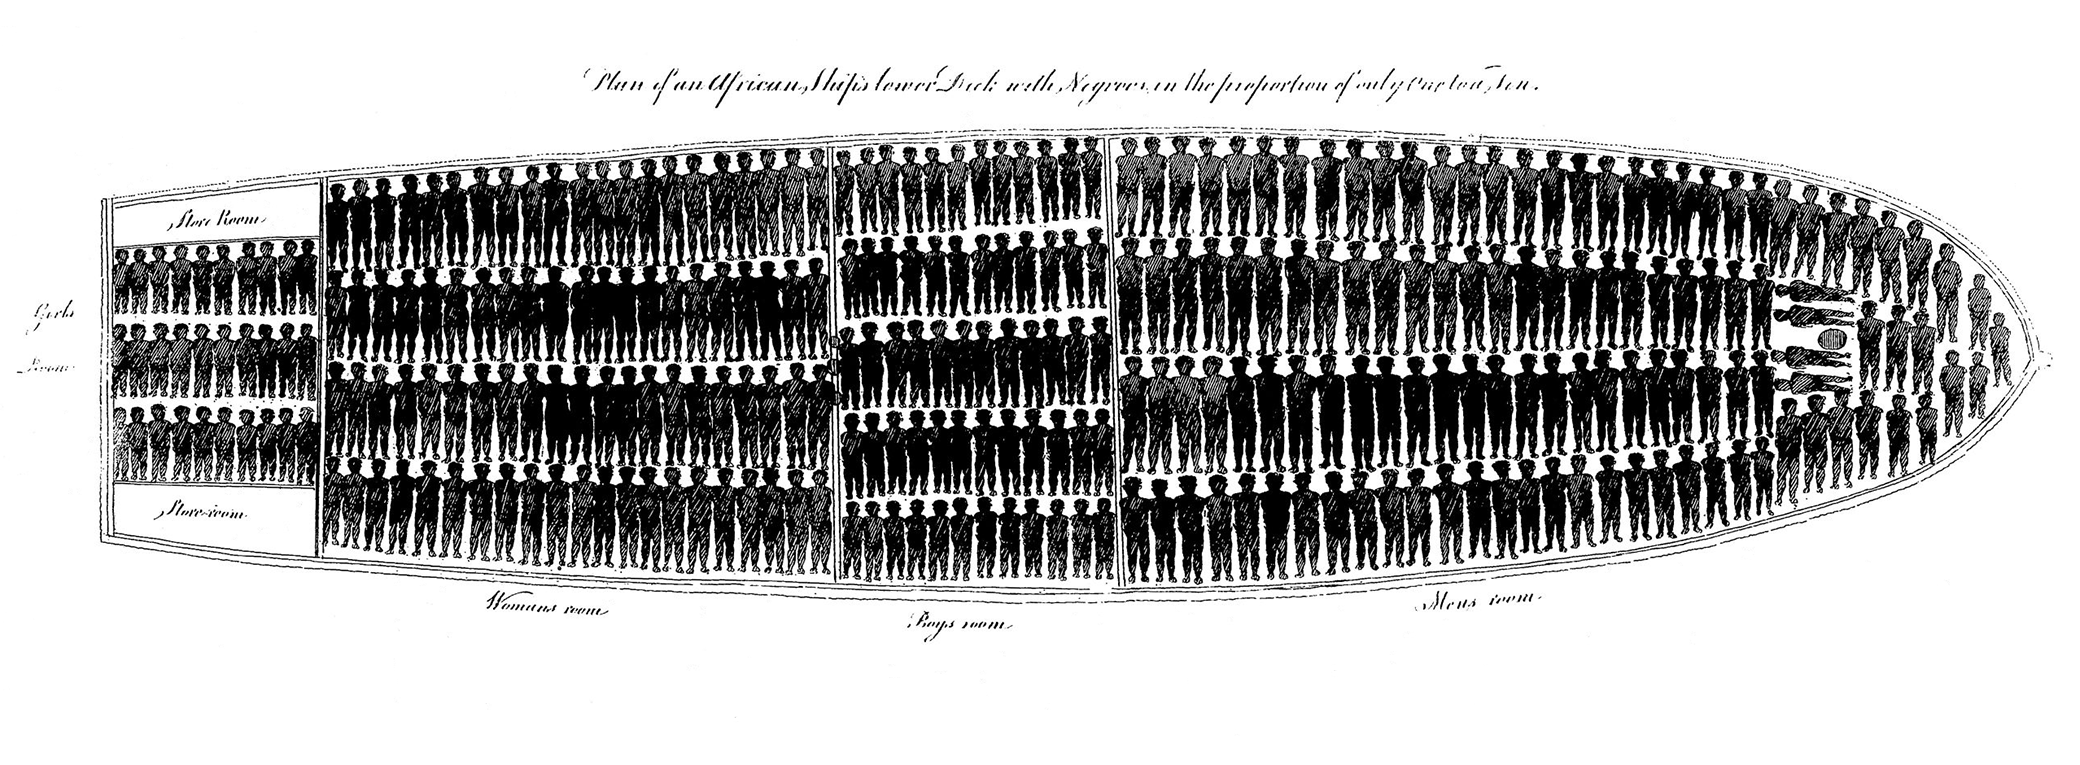 Plan of an African Ship’s Lower Deck with Negroes in the Proportion of Only One to One Ton, by Sir William Elford, c. 1789. Library of the Society of Friends.